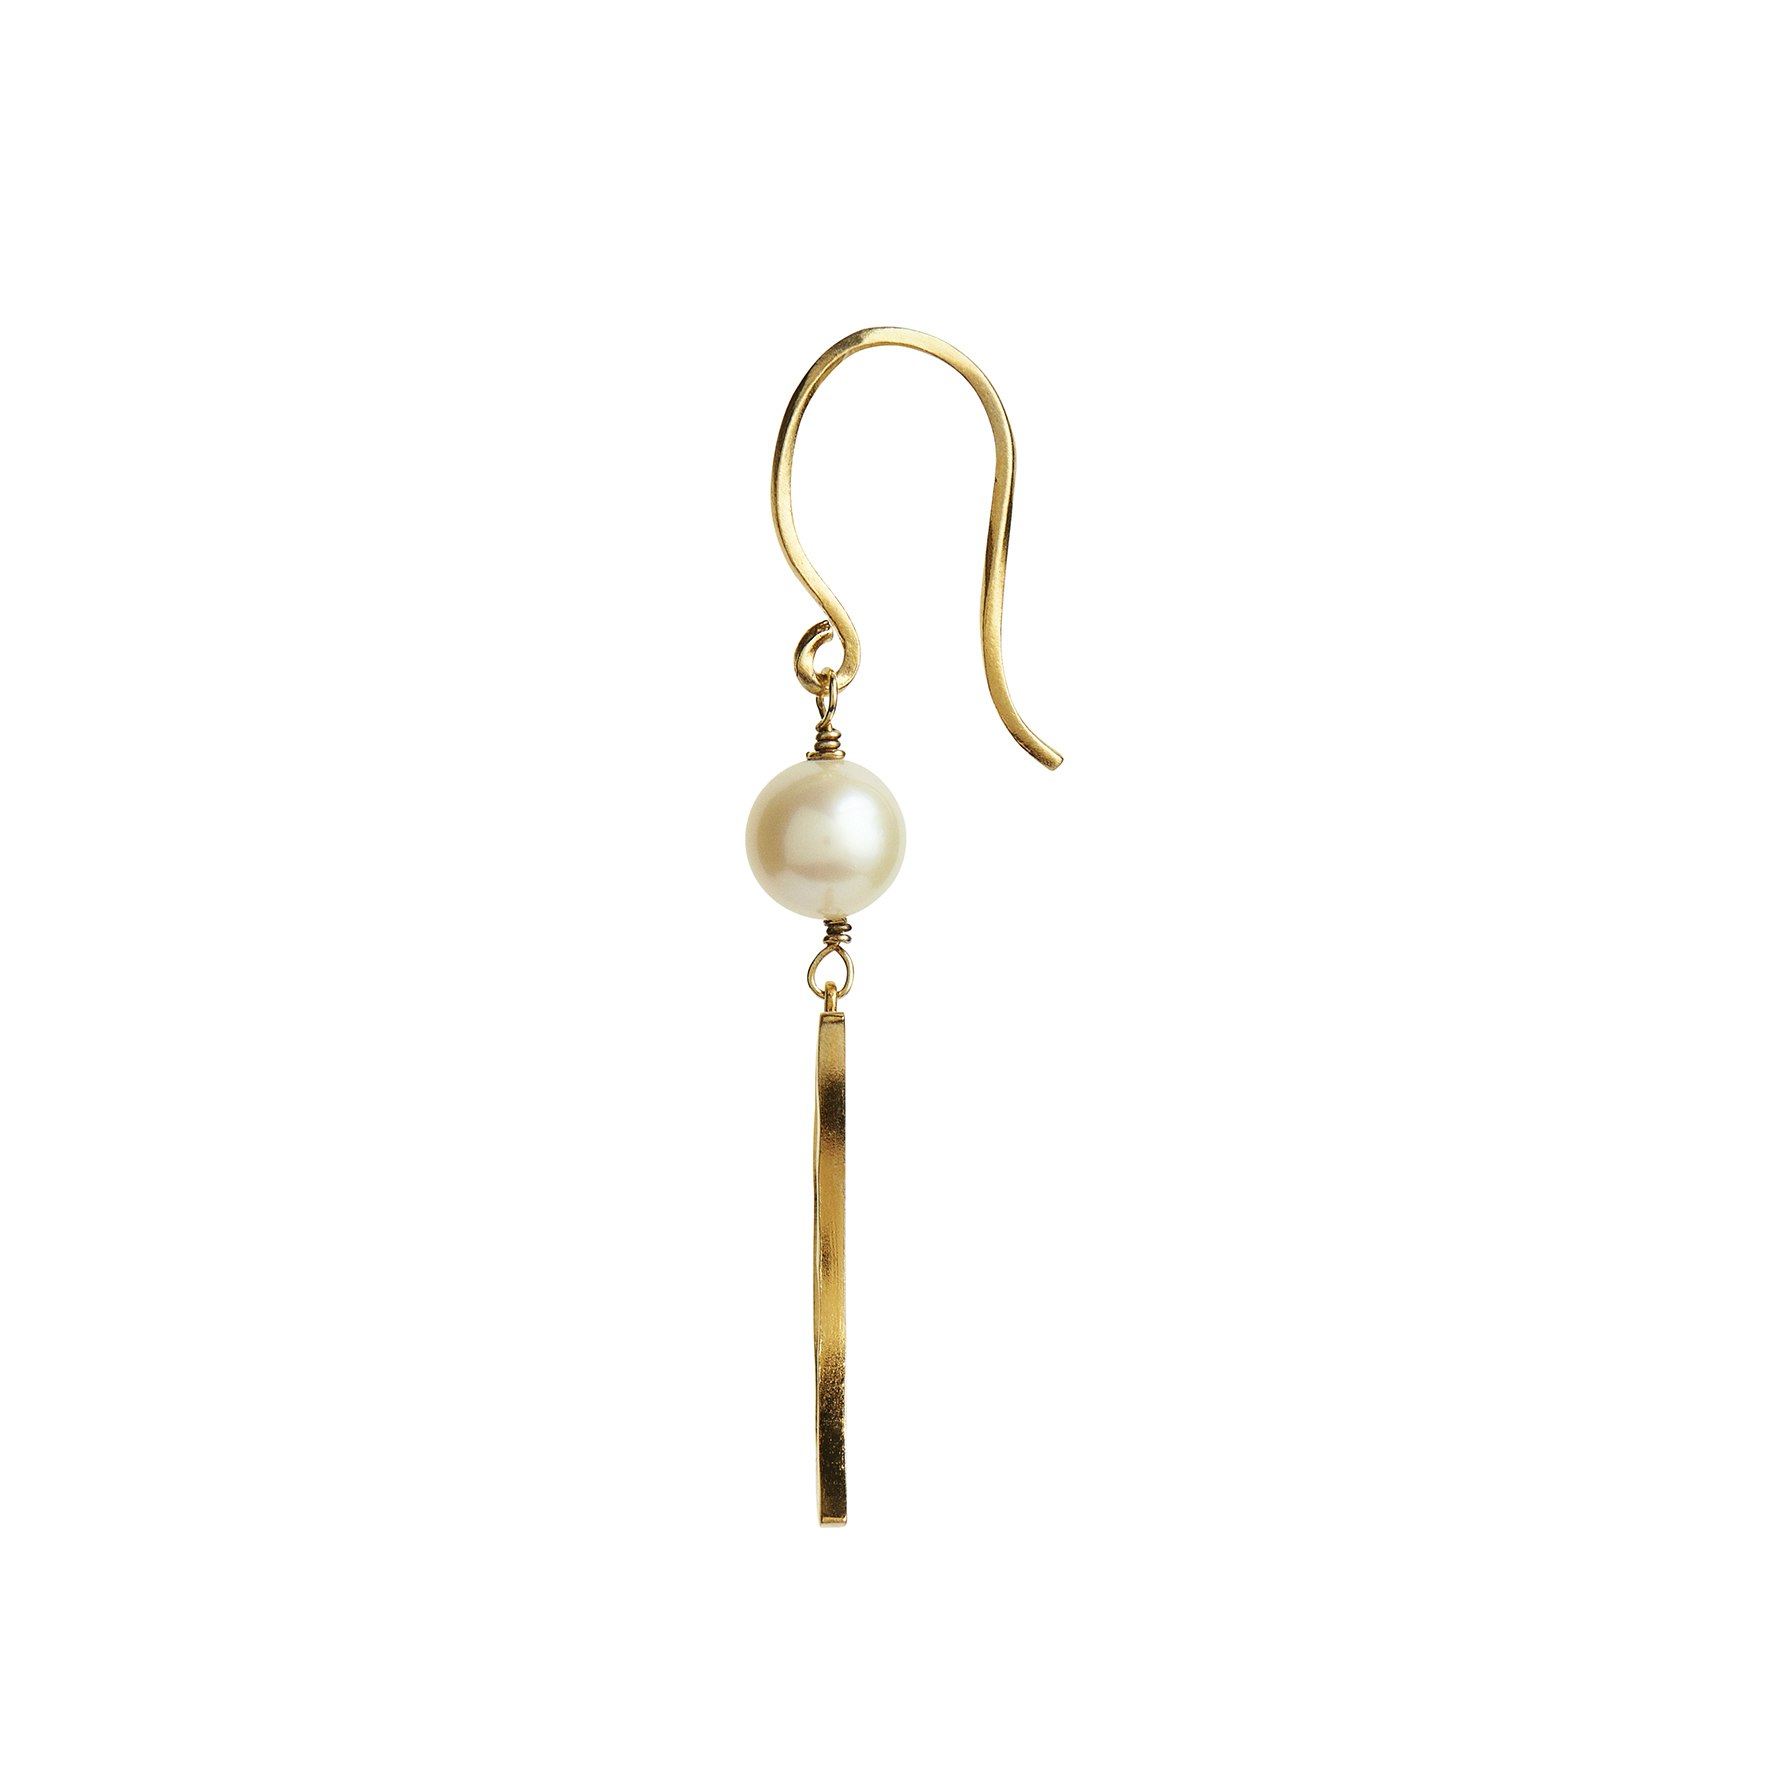 Bella Moon Earring With Pearl von STINE A Jewelry in Vergoldet-Silber Sterling 925